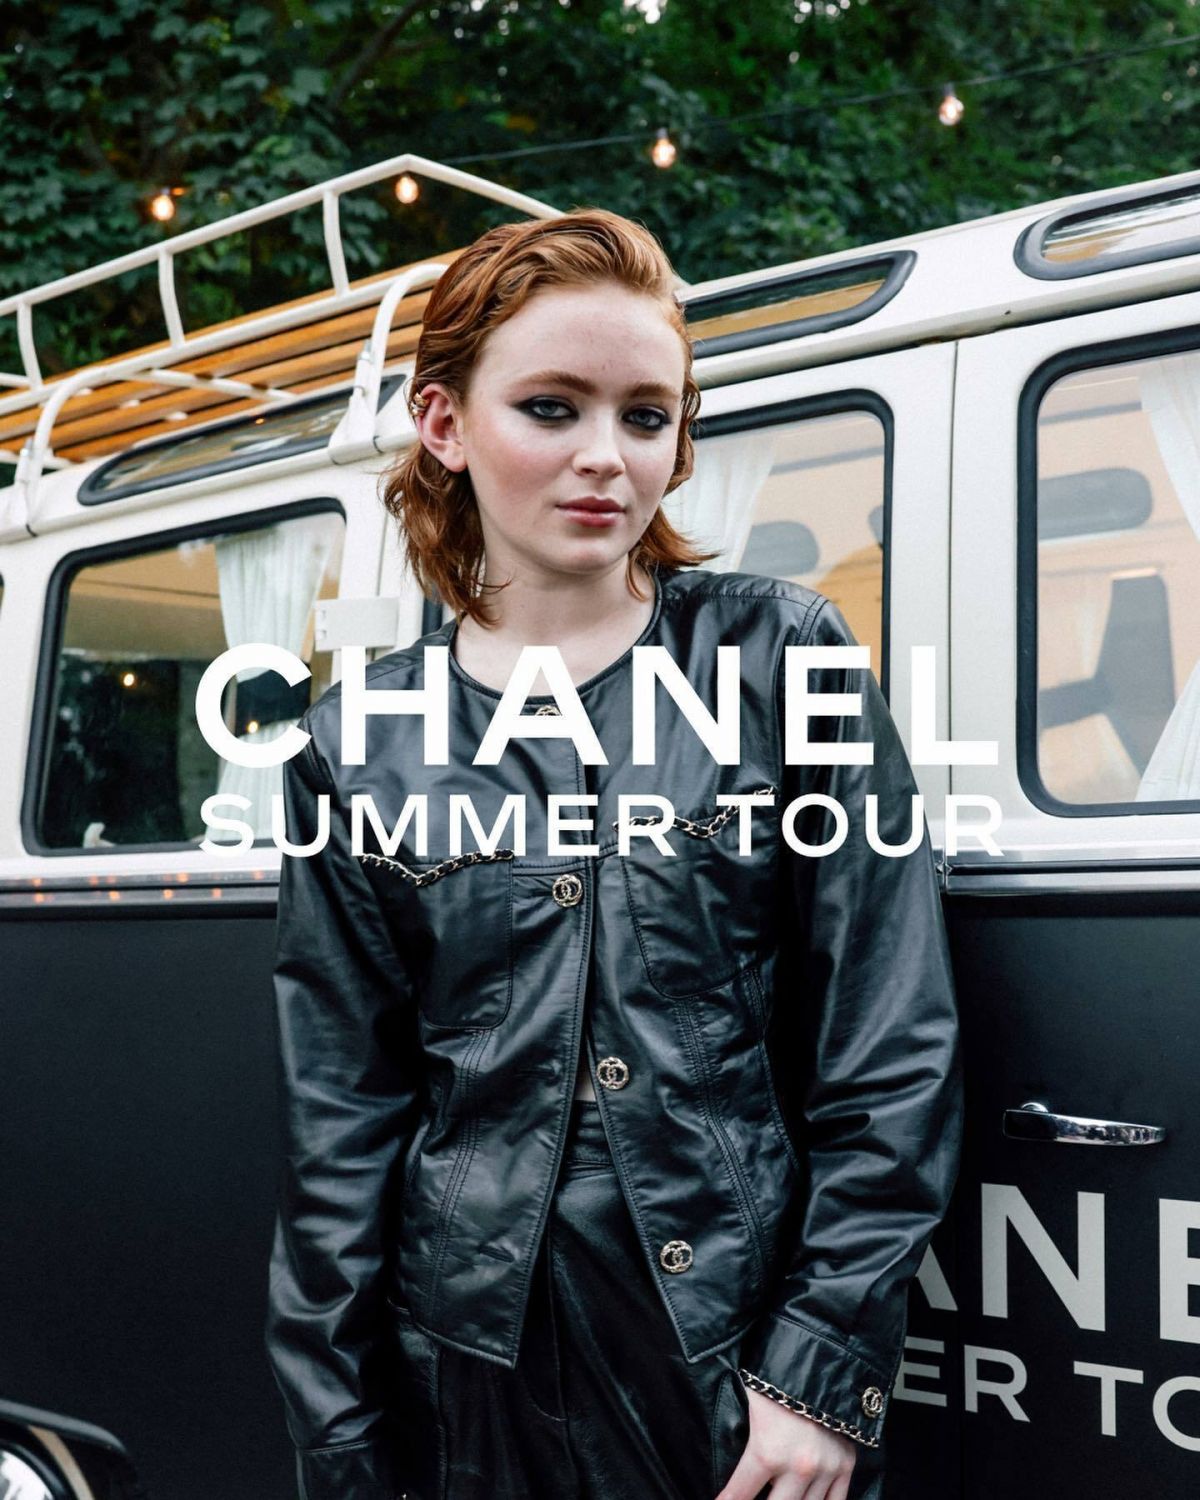 Sadie Sink Poses for Chanel Summer Tour Campaign